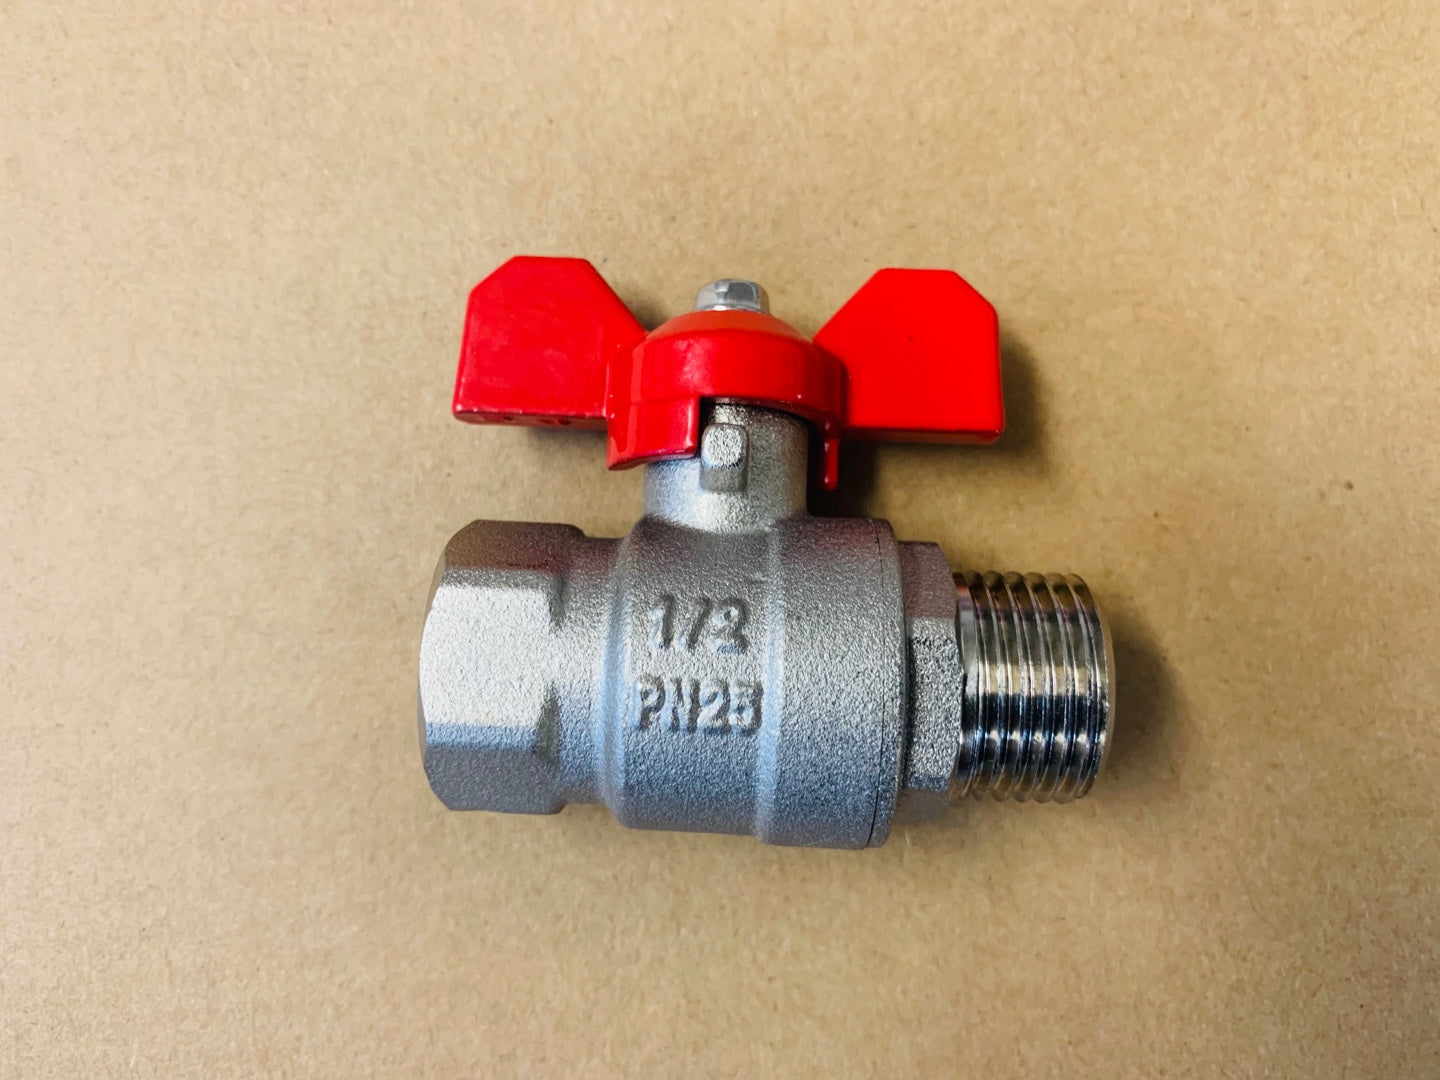 [313] Male + Female ball valve 15mm (red)